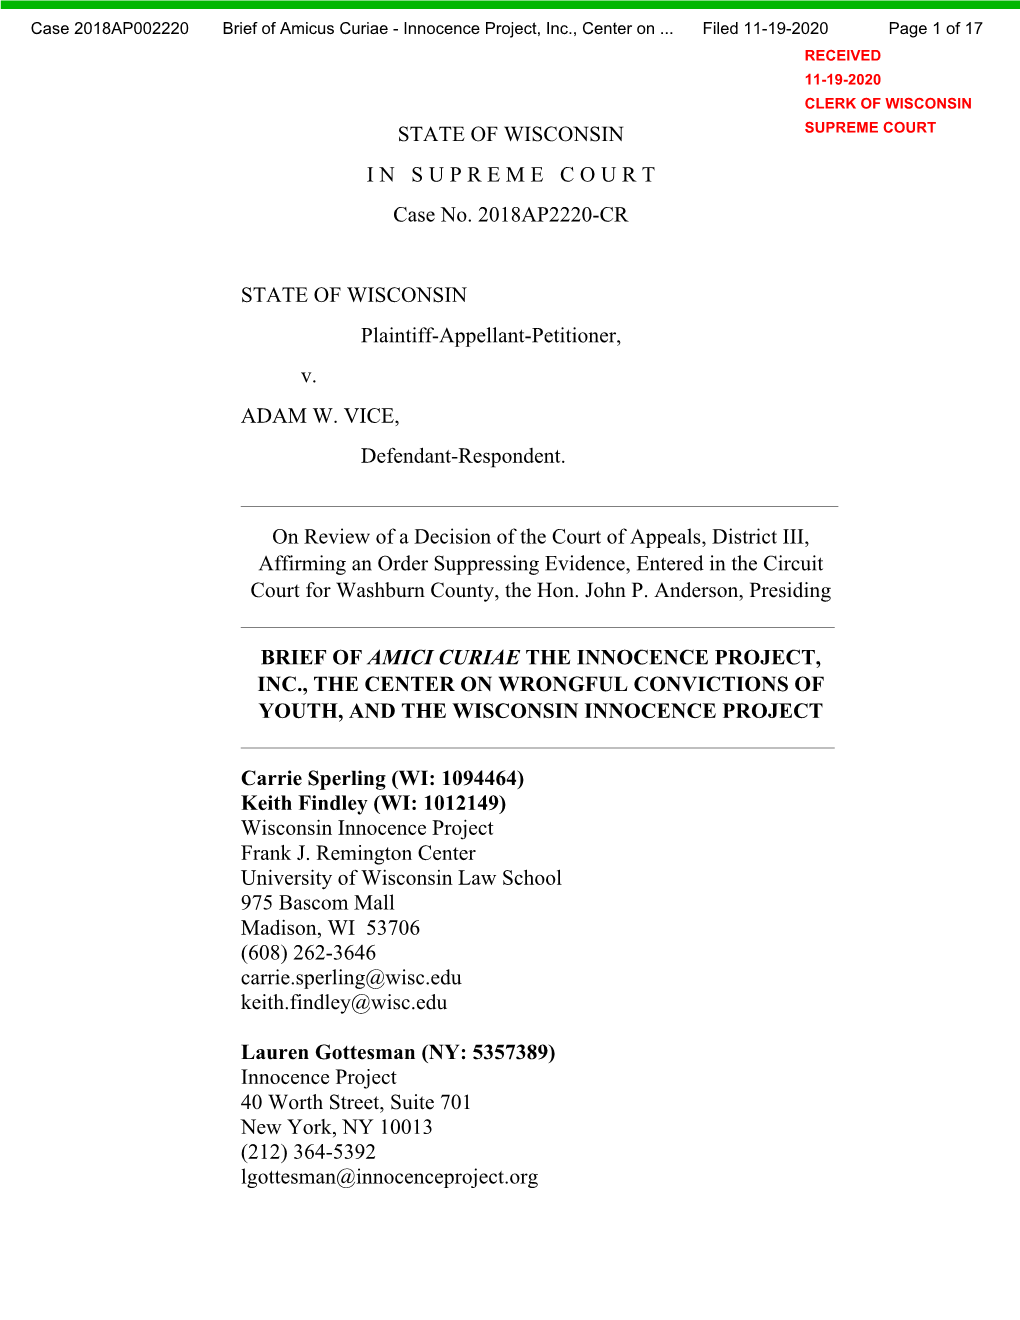 Brief of Amicus Curiae - Innocence Project, Inc., Center on